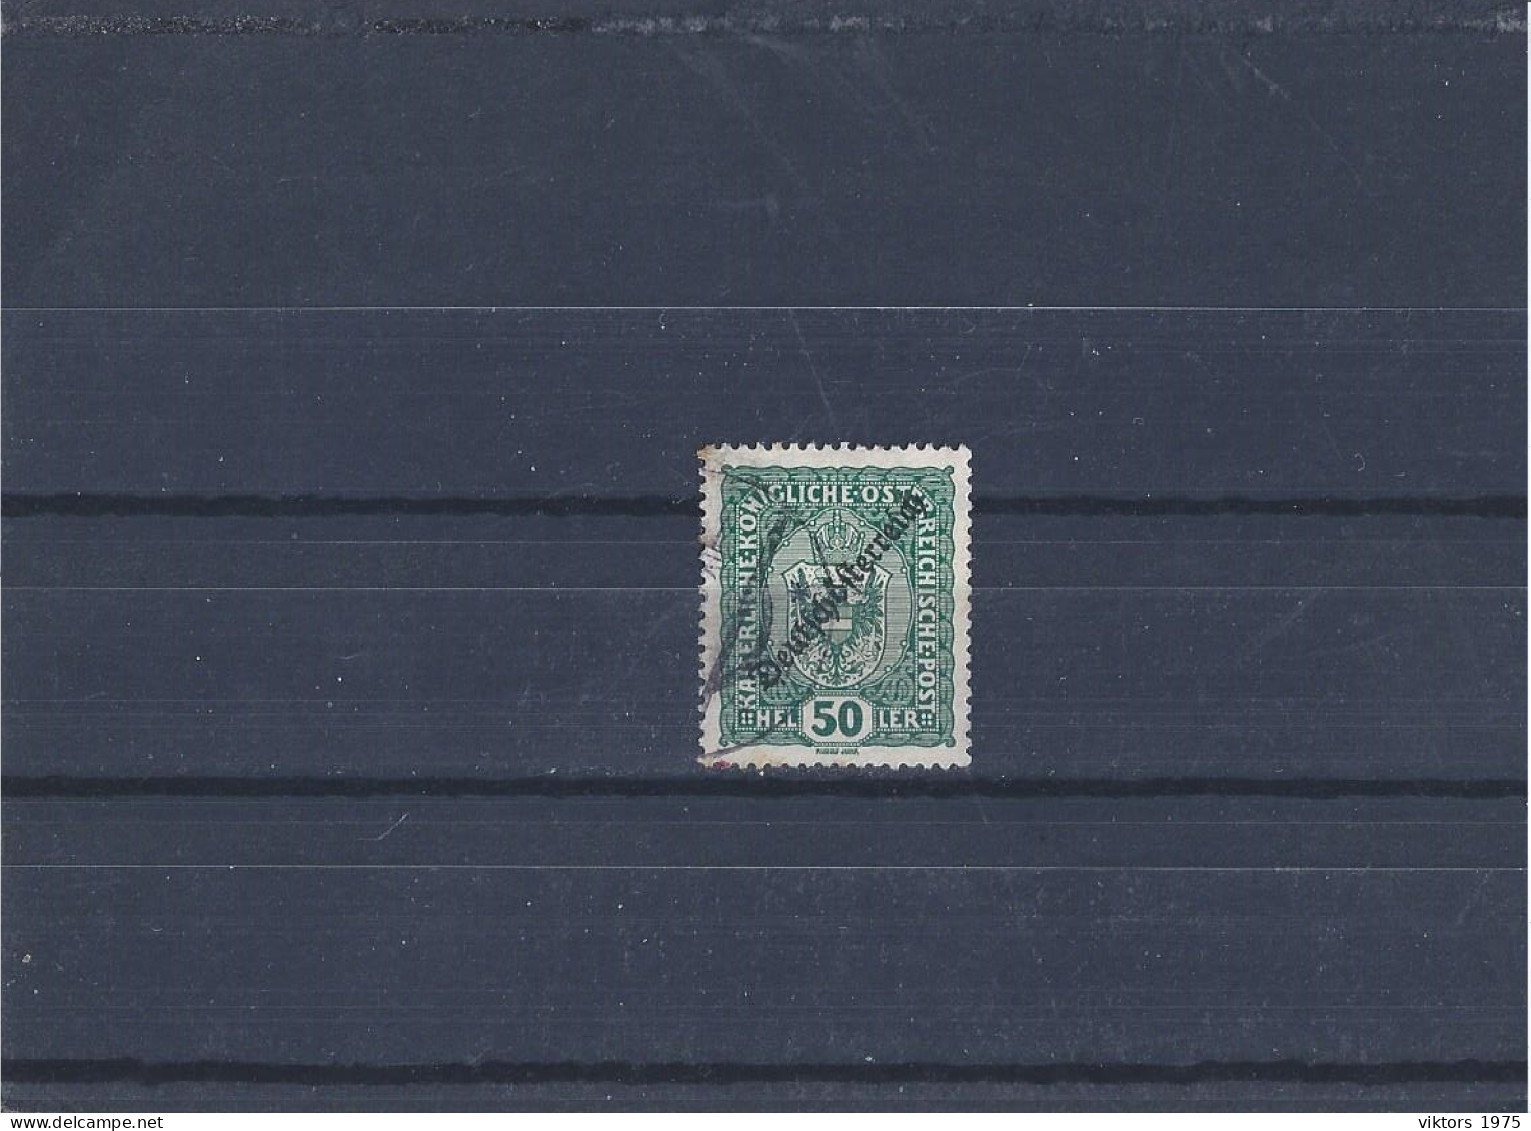 Used Stamp Nr.238 In MICHEL Catalog - Used Stamps